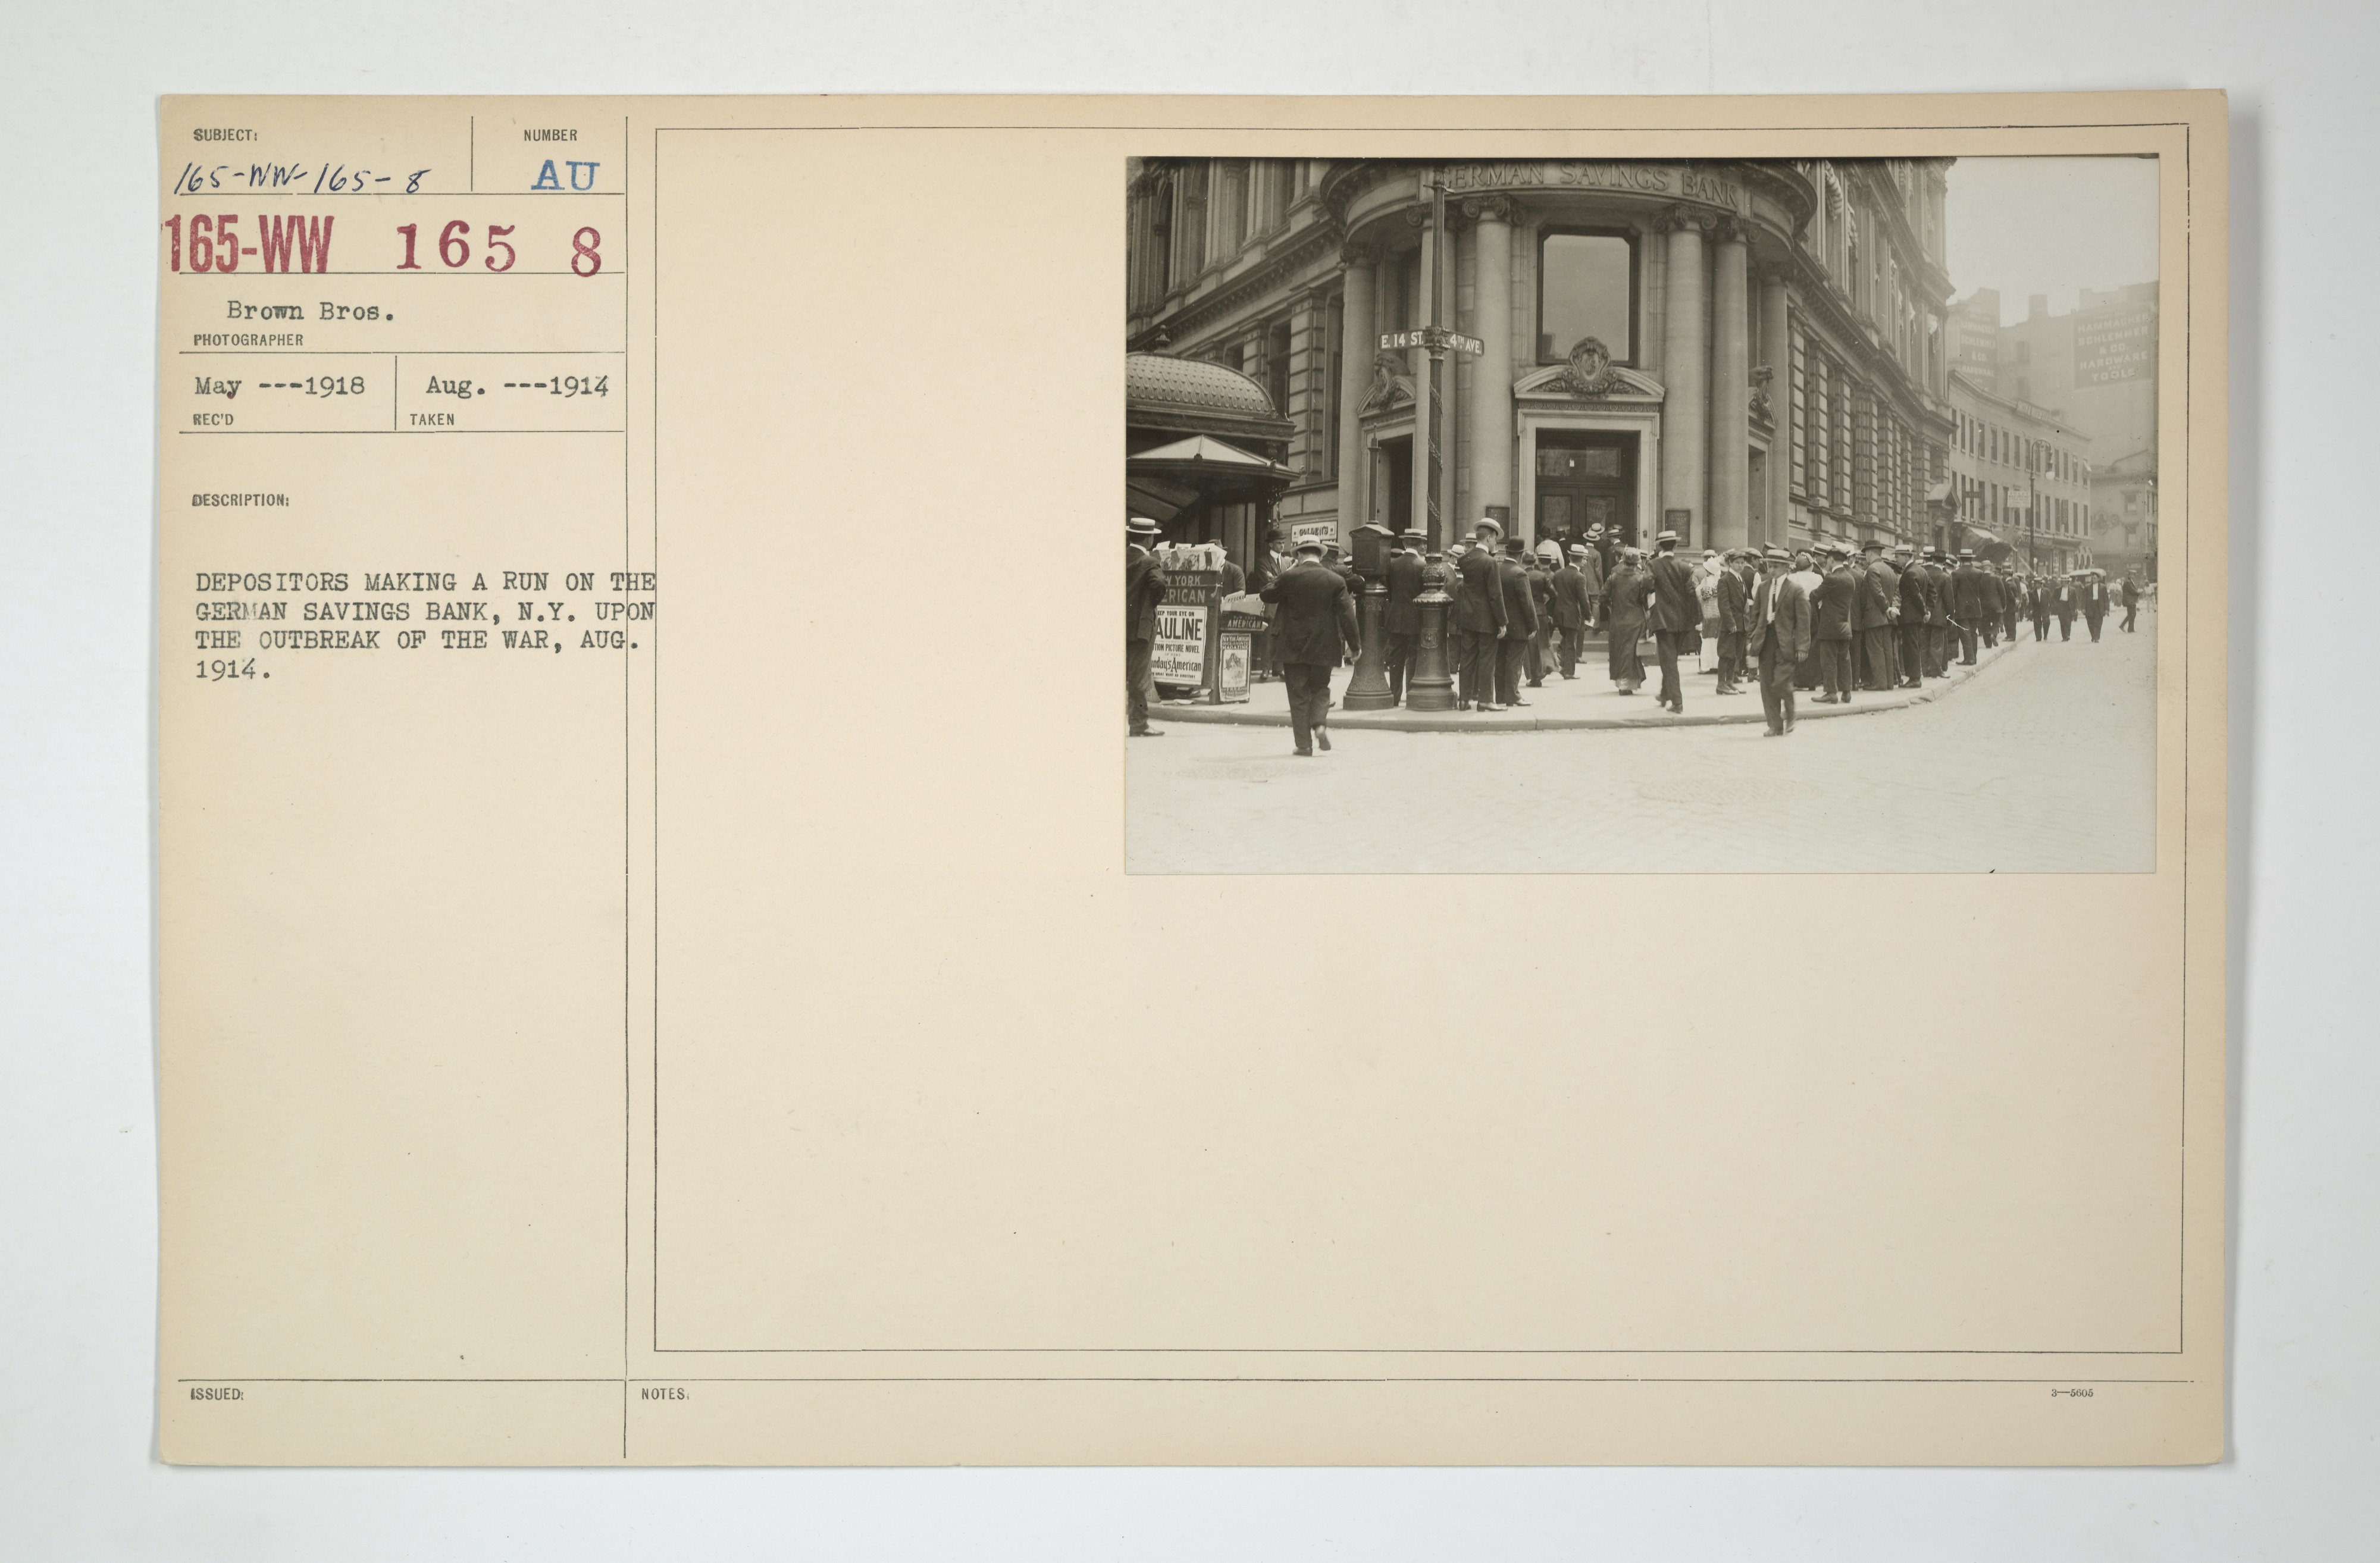 Enemy Activities - Miscellaneous - Depositors making a run on the German Savings Bank, New York, upon the outbreak of the war, August 1914 - NARA - 31480058